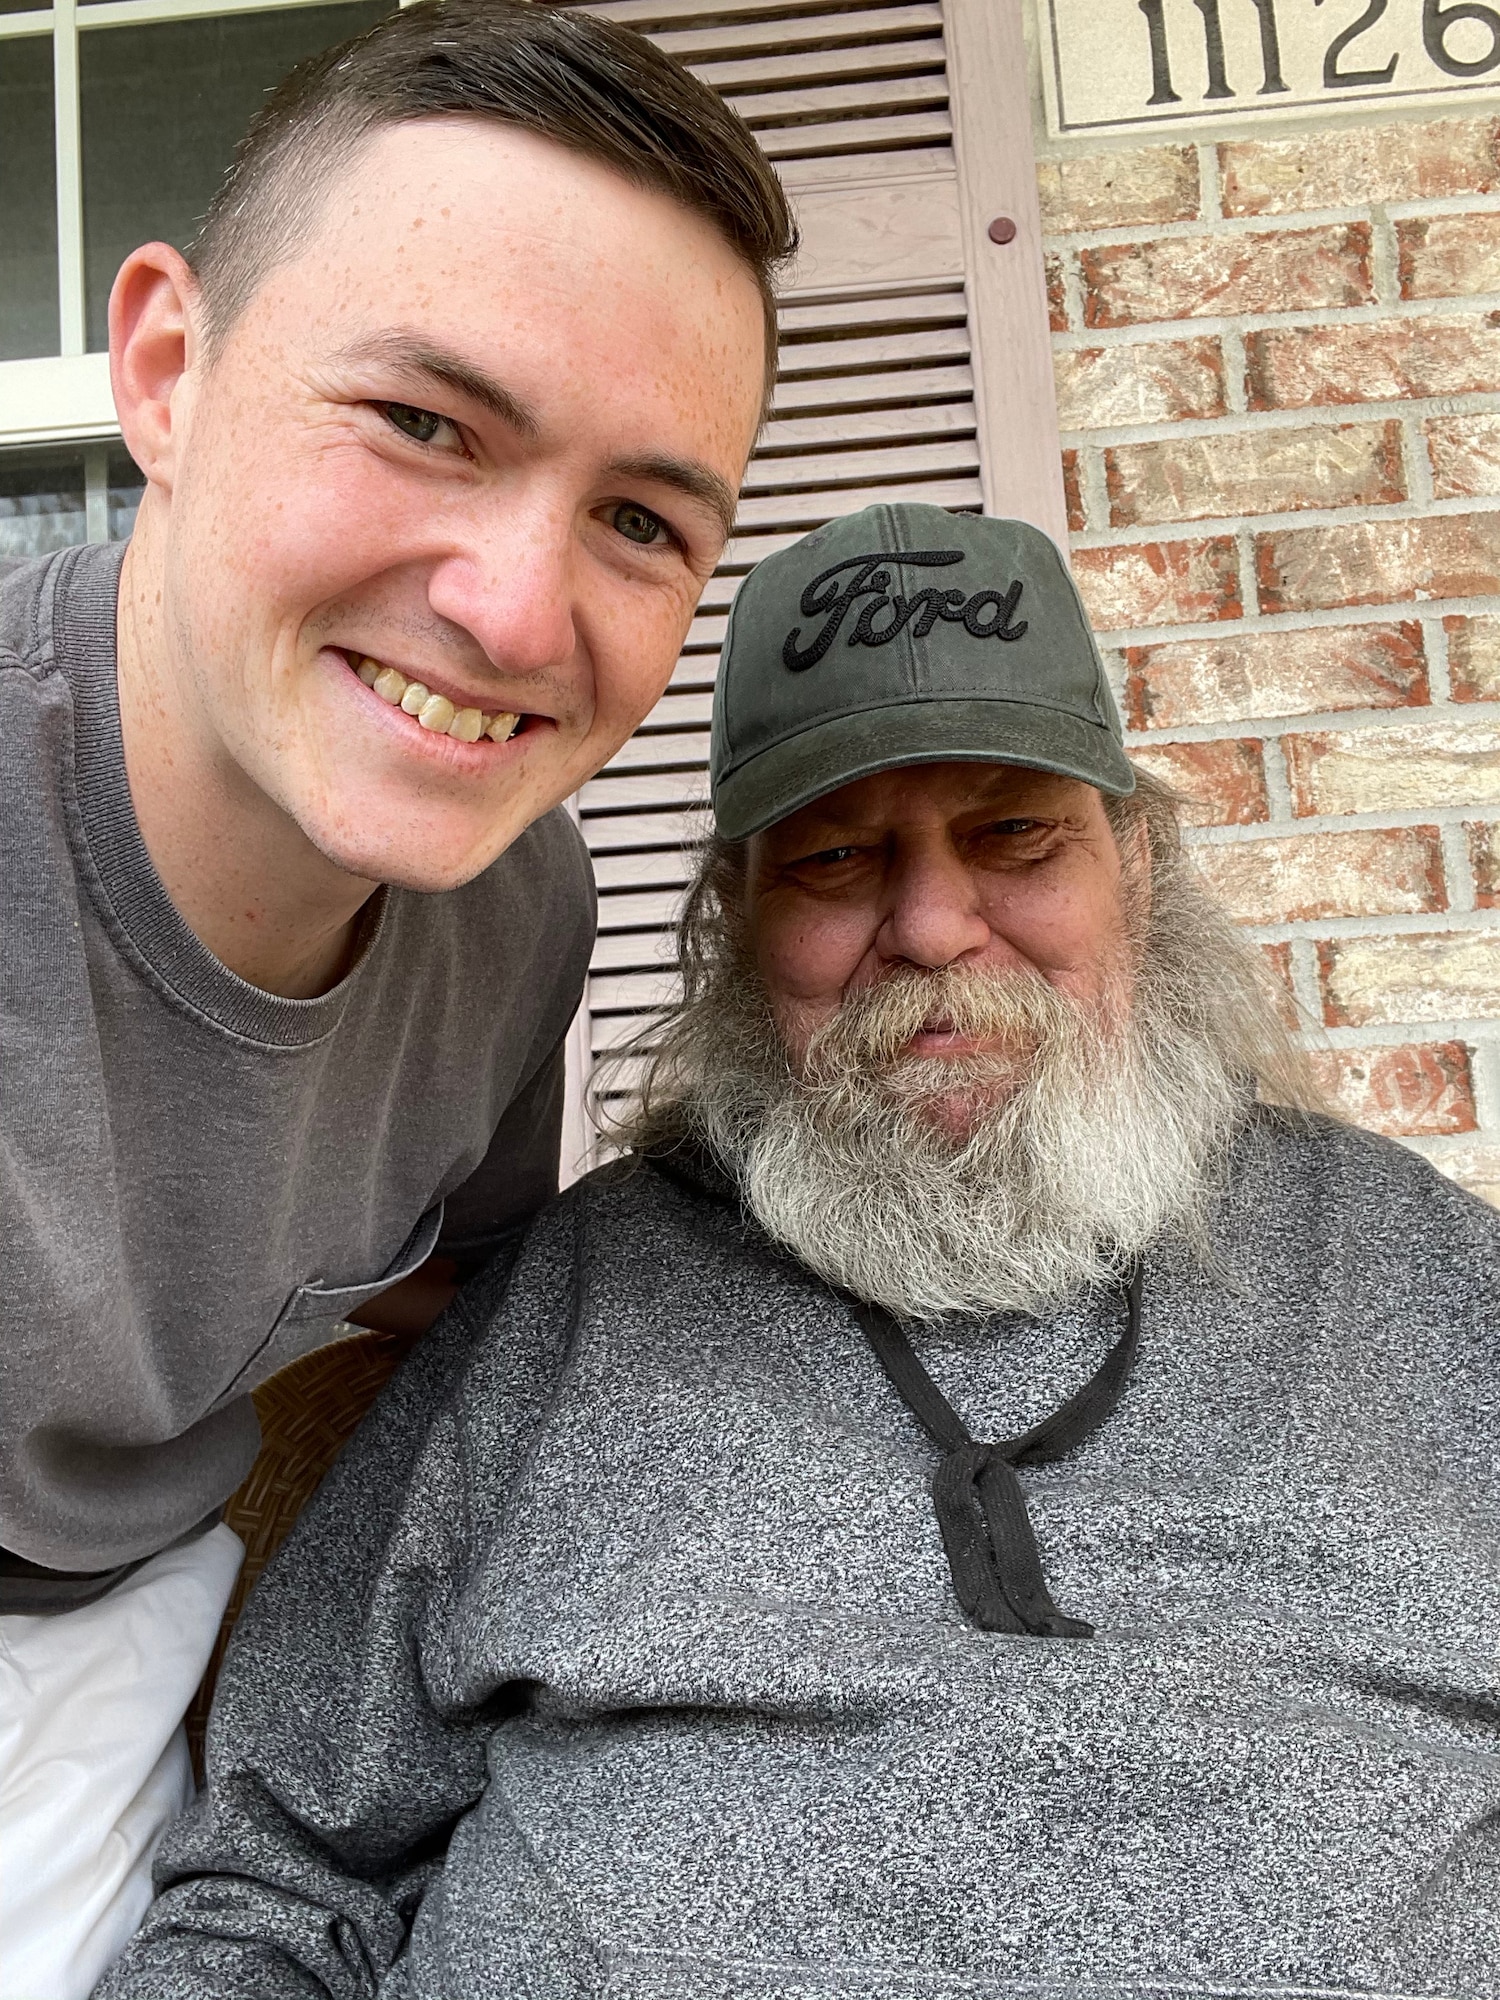 Airman 1st Class Austin Jacobs visits his neighbor, George Metzger after being released from the hospital in his hometown of Indiana on Apr. 16, 2021 (Courtesy Photo)